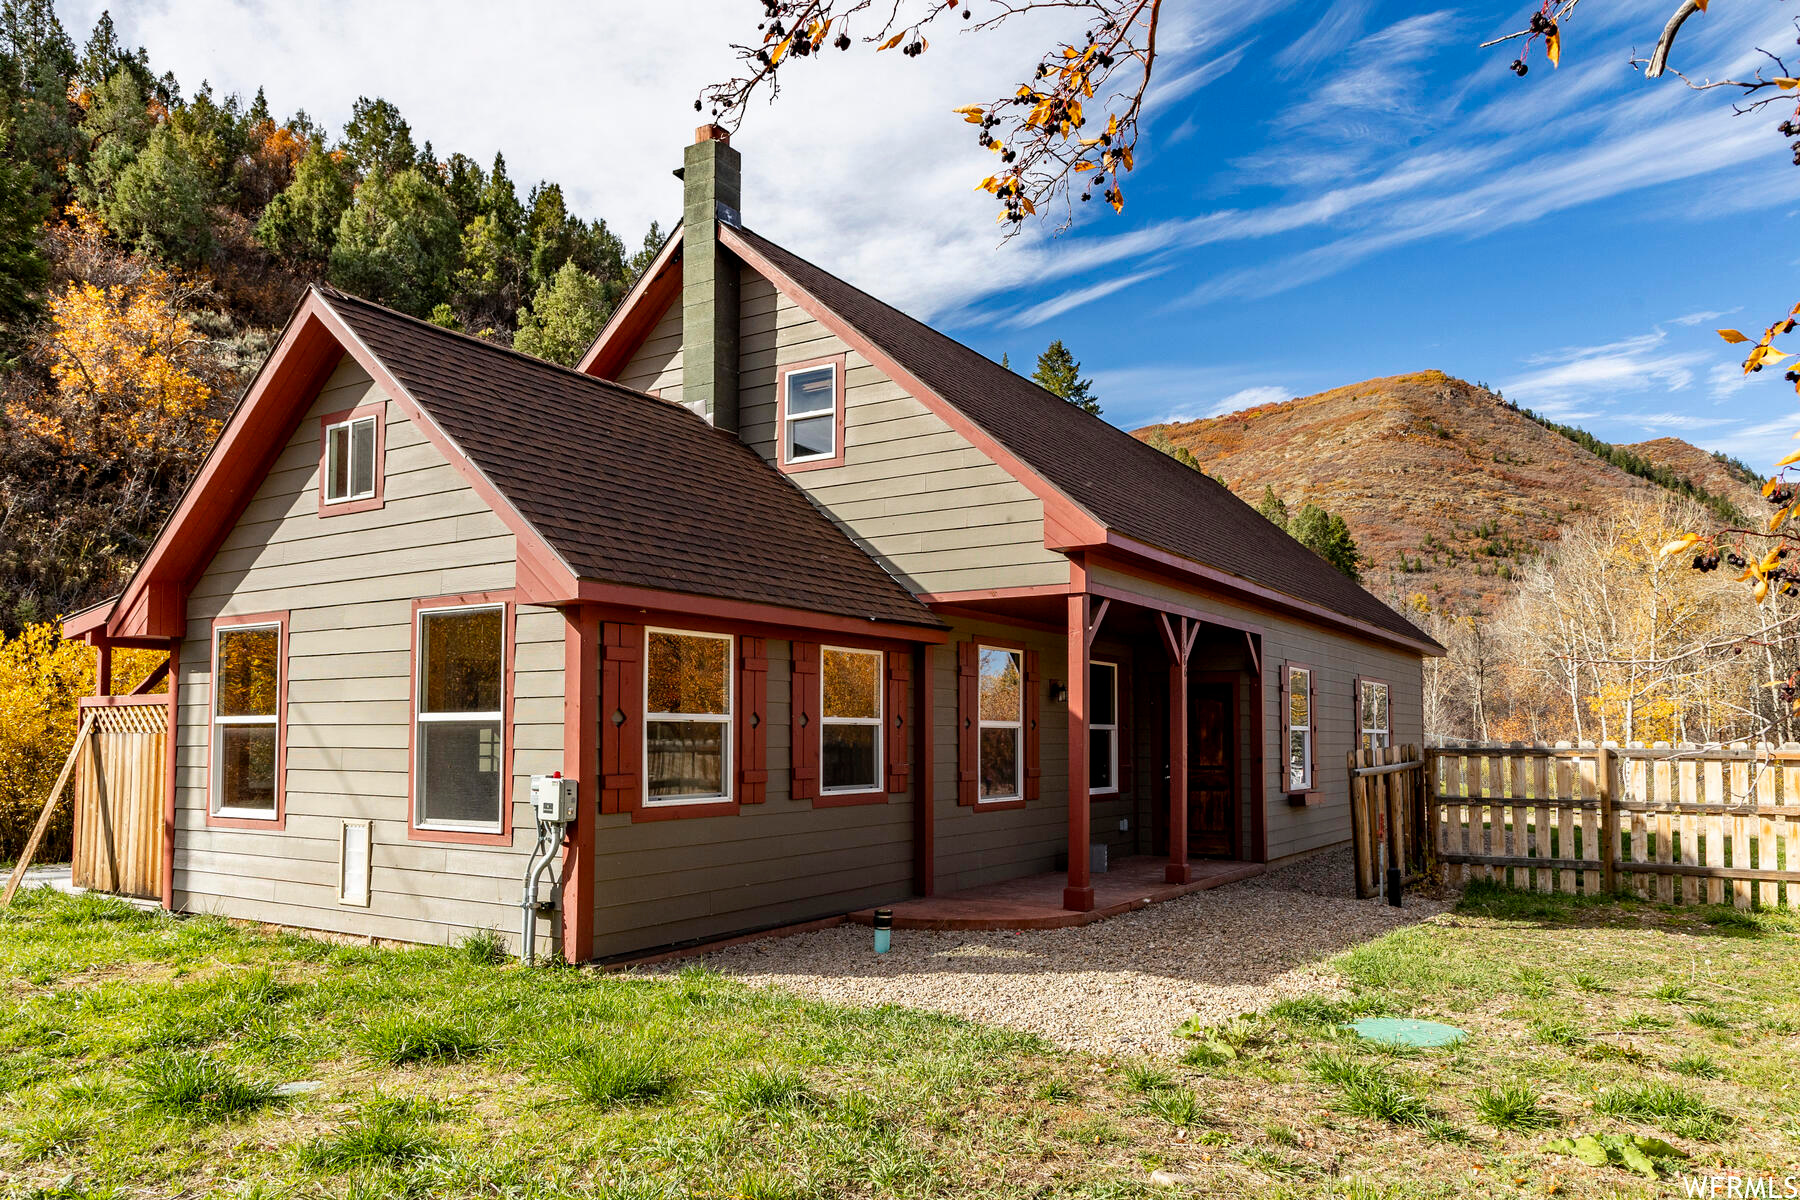 1686 COUNTRY, Kamas, Utah 84036, 2 Bedrooms Bedrooms, 9 Rooms Rooms,1 BathroomBathrooms,Residential,For sale,COUNTRY,1962859